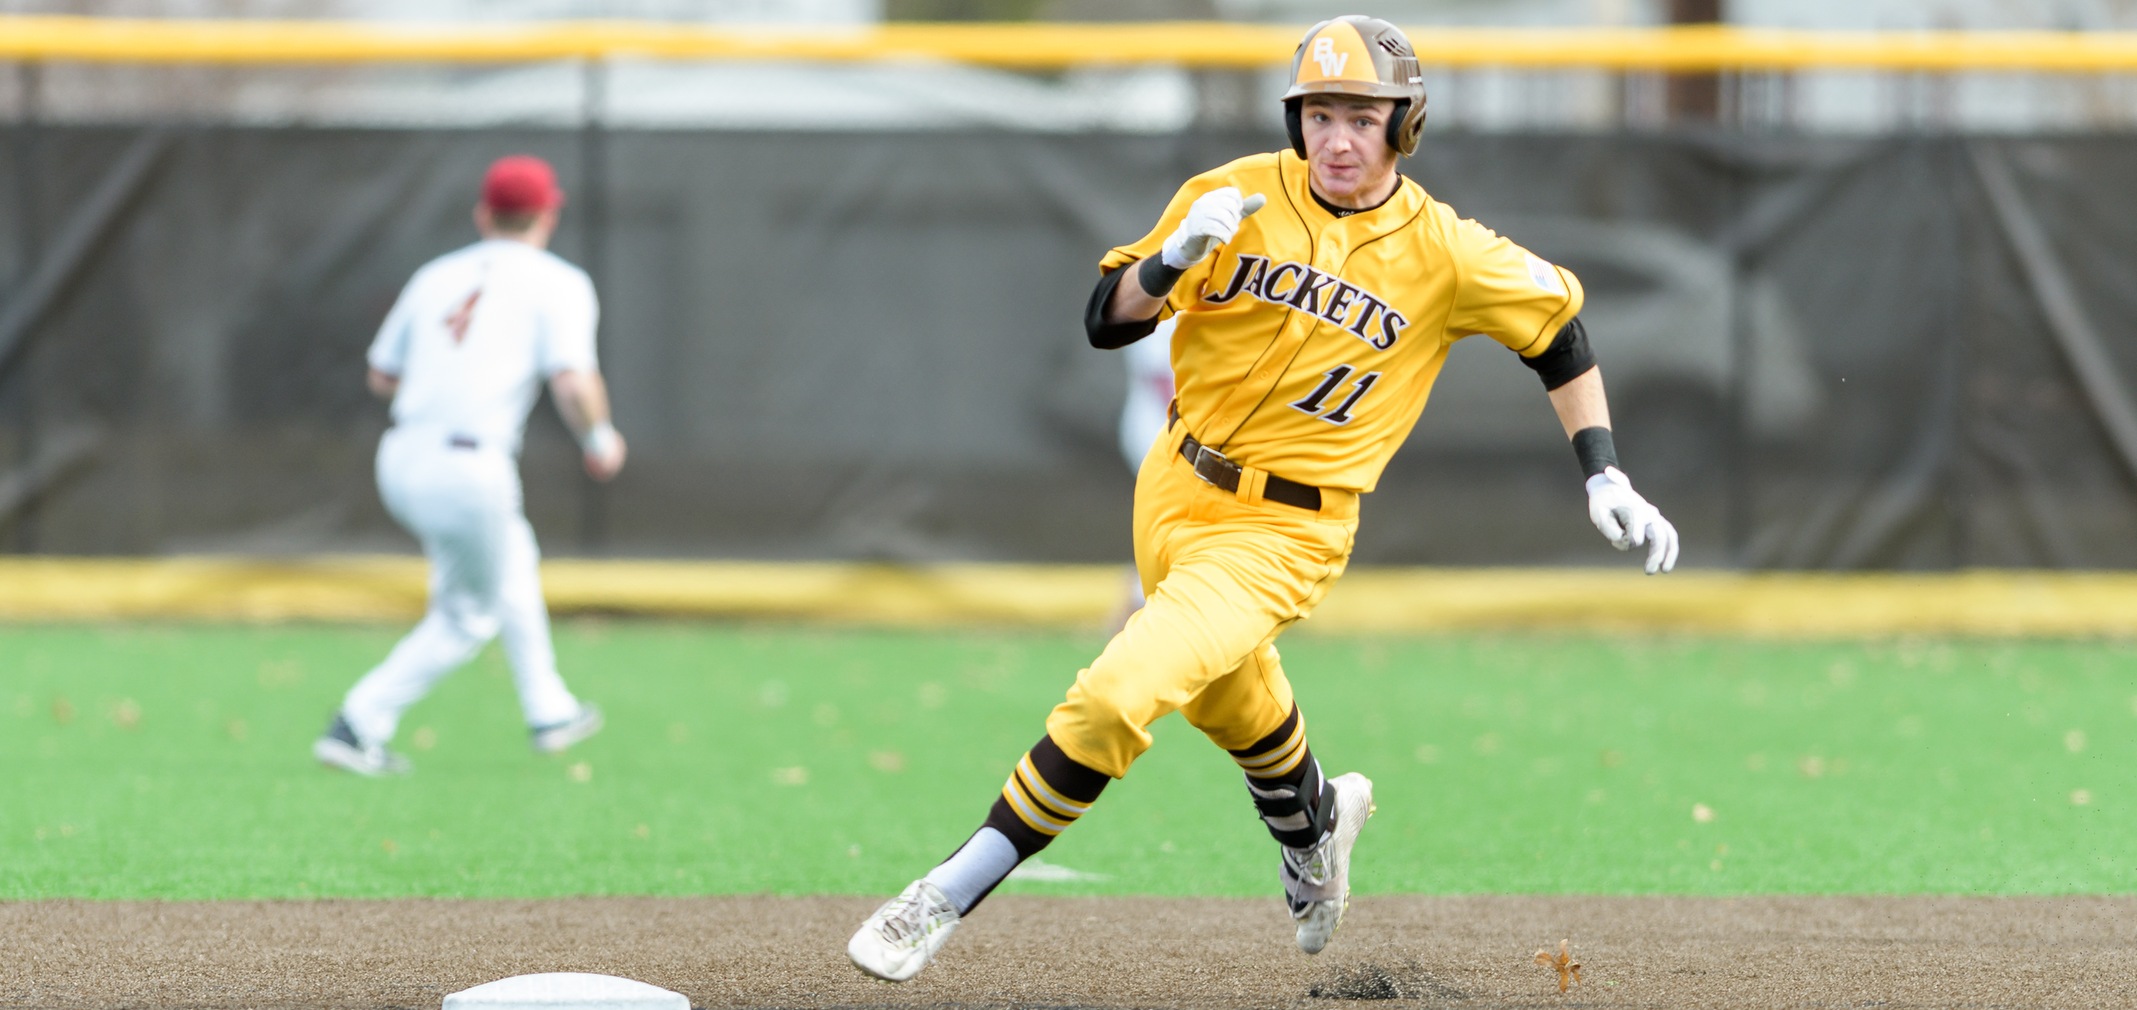 Sophomore shortstop Alex Ludwick had a career-tying four hits in the 7-2 victory over Otterbein in game one (Photo courtesy of Jesse Kucewicz)